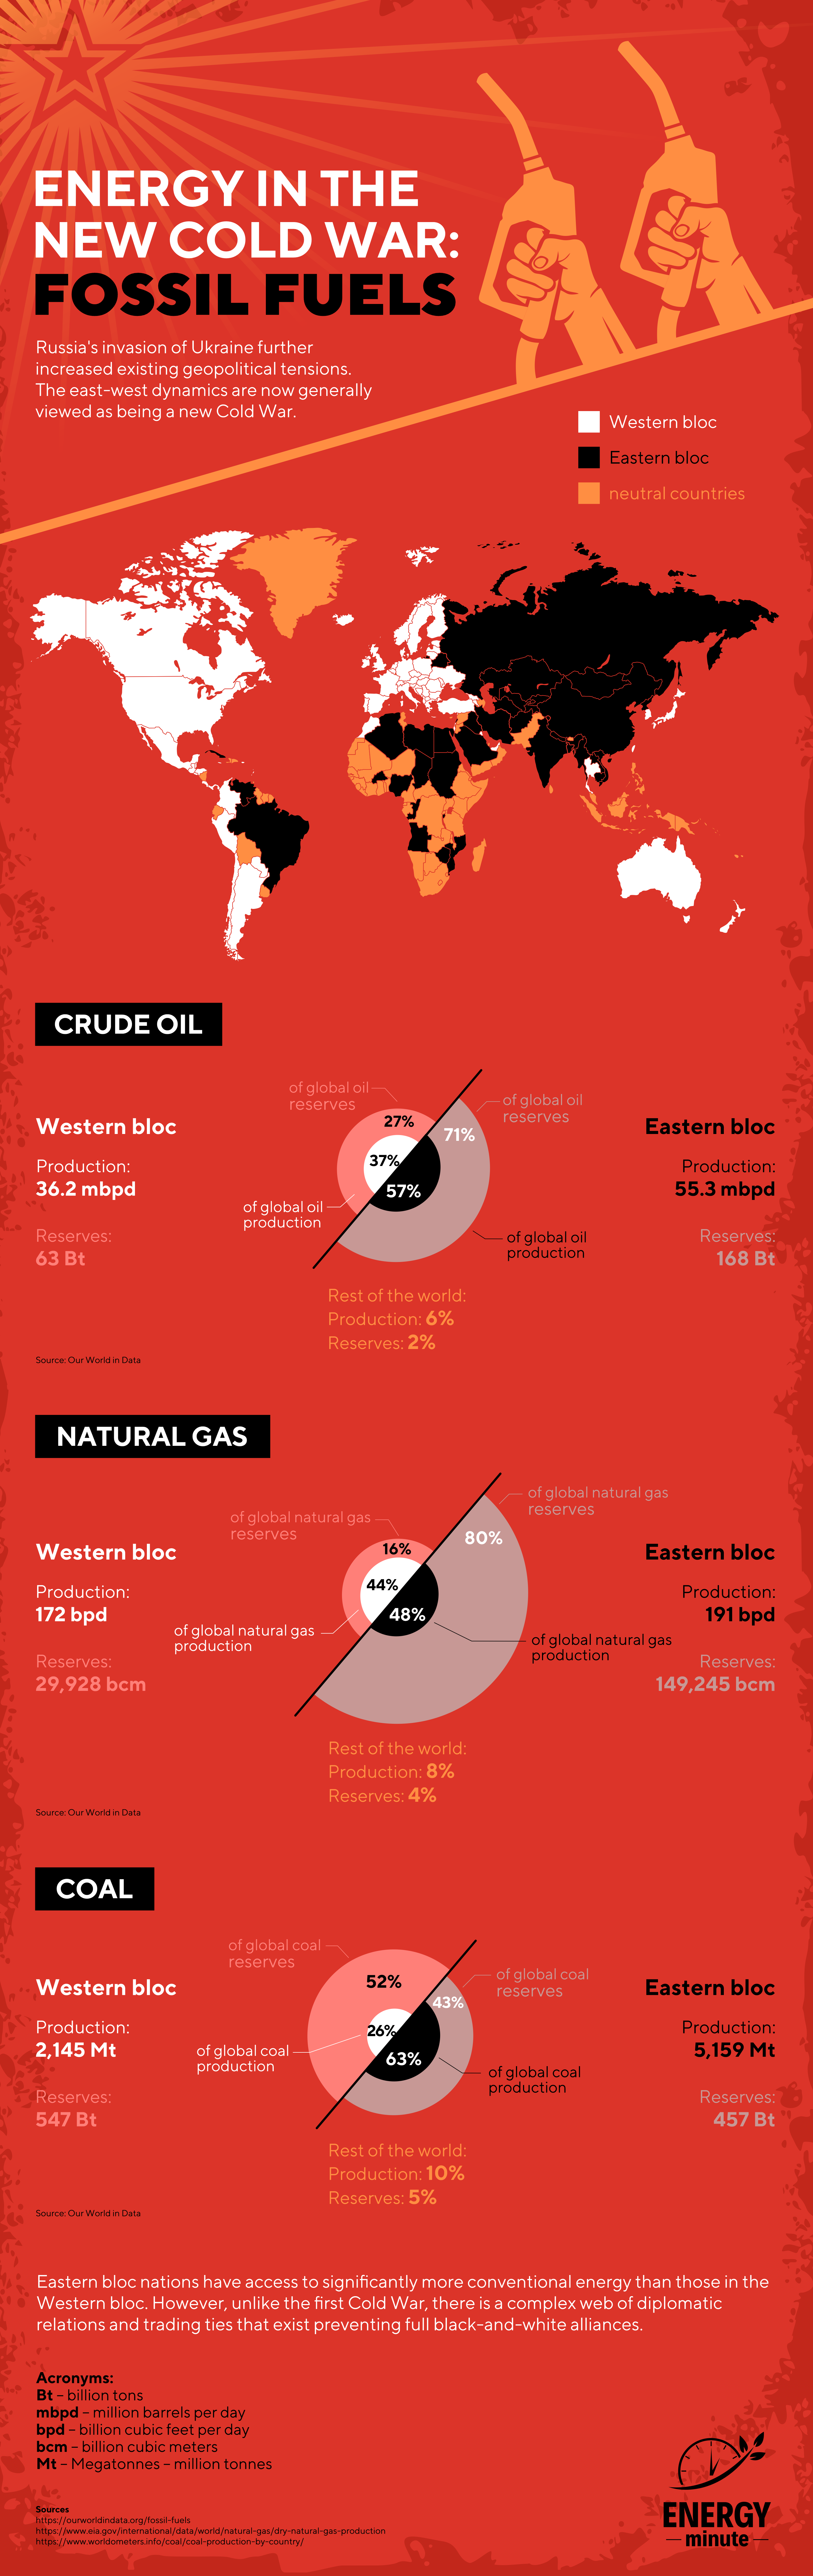 Fossil fuel distribution in the new geopolitical tensions